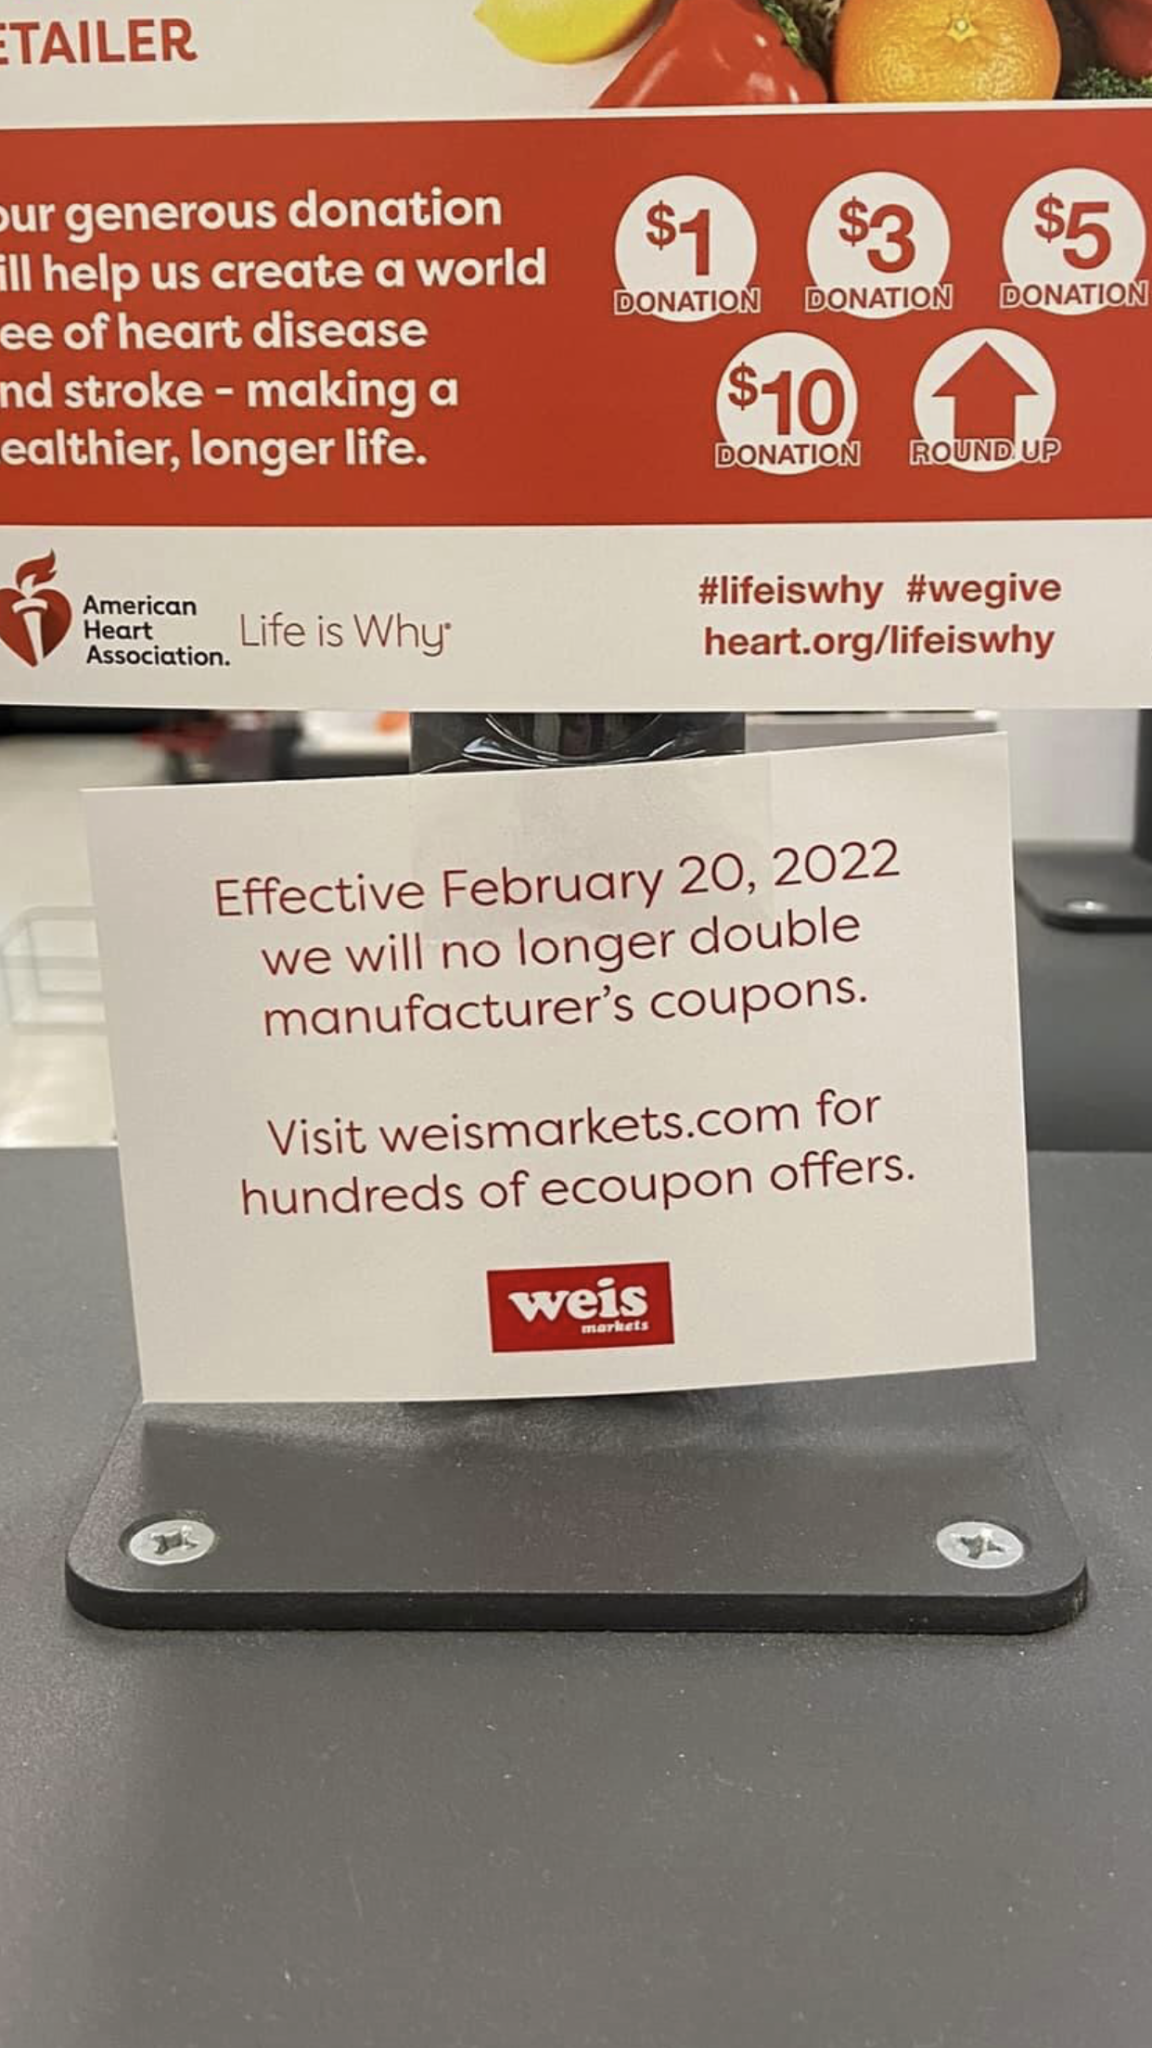 Weis: Changes To The Coupon Policy Starting February 20